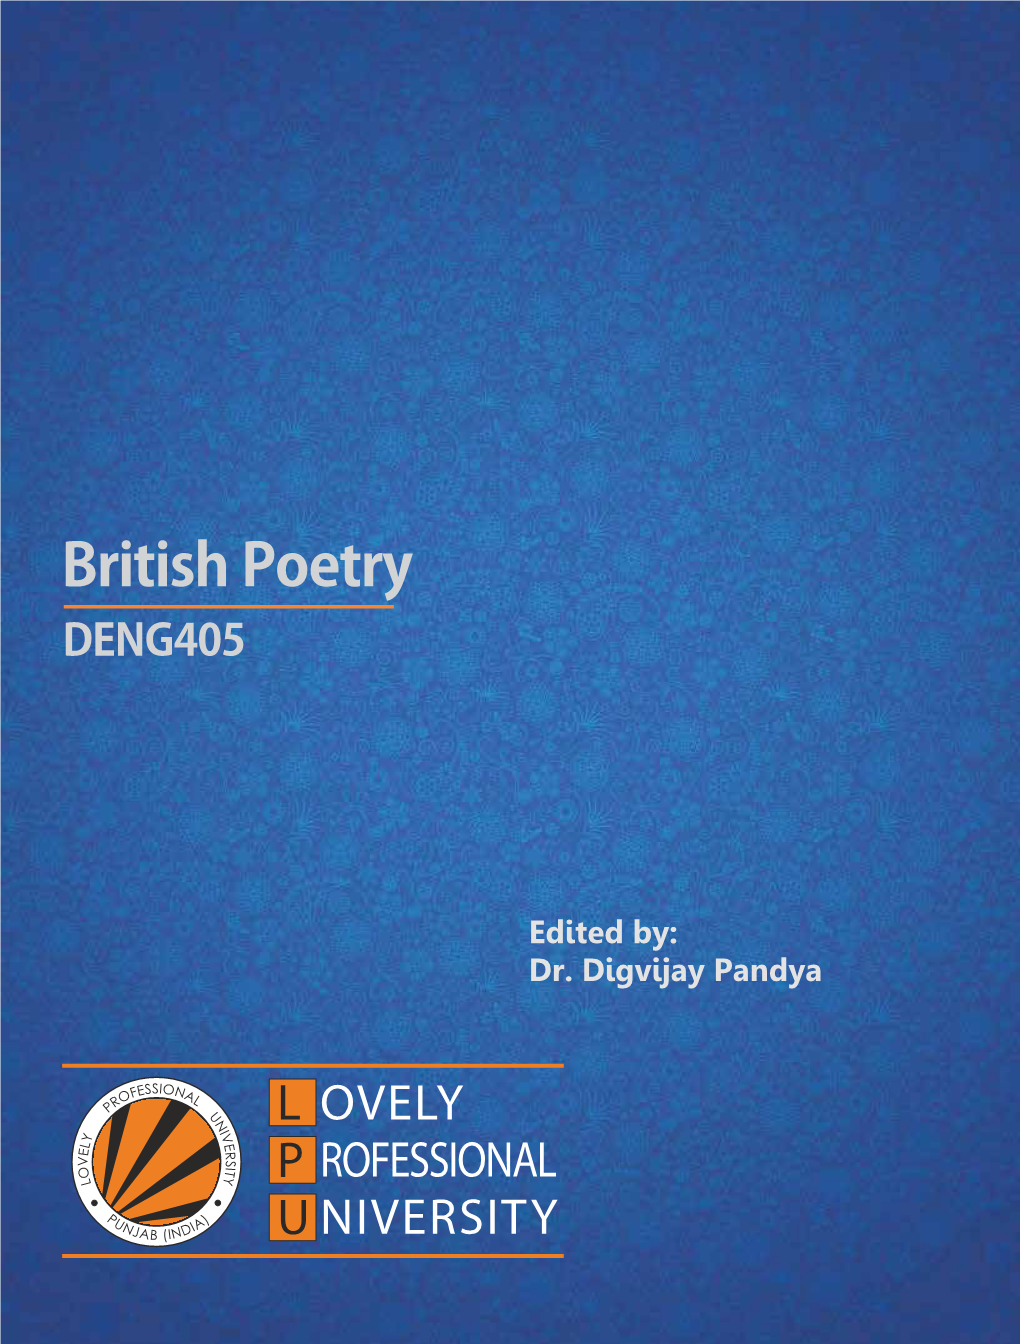 BRITISH POETRY Edited by Dr